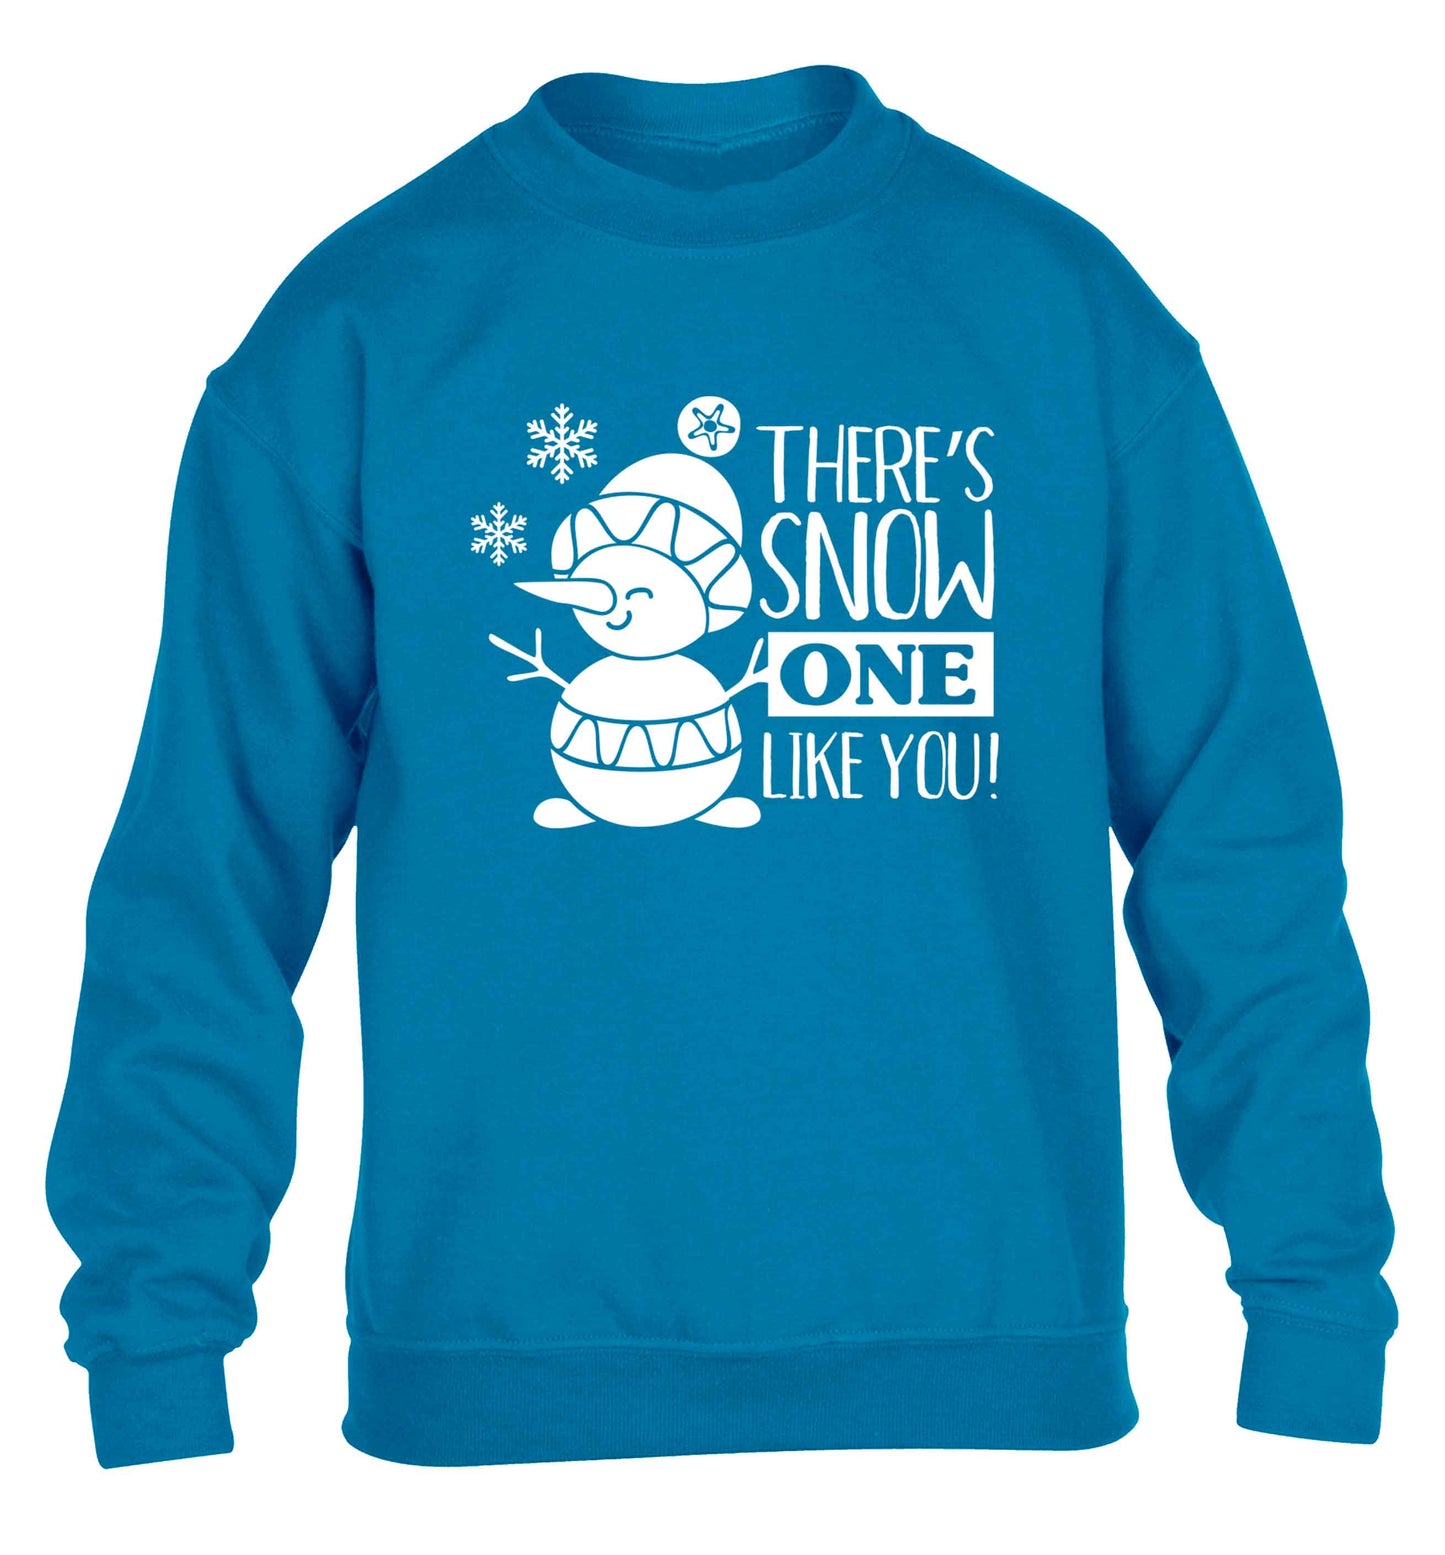 There's snow one like you children's blue sweater 12-13 Years